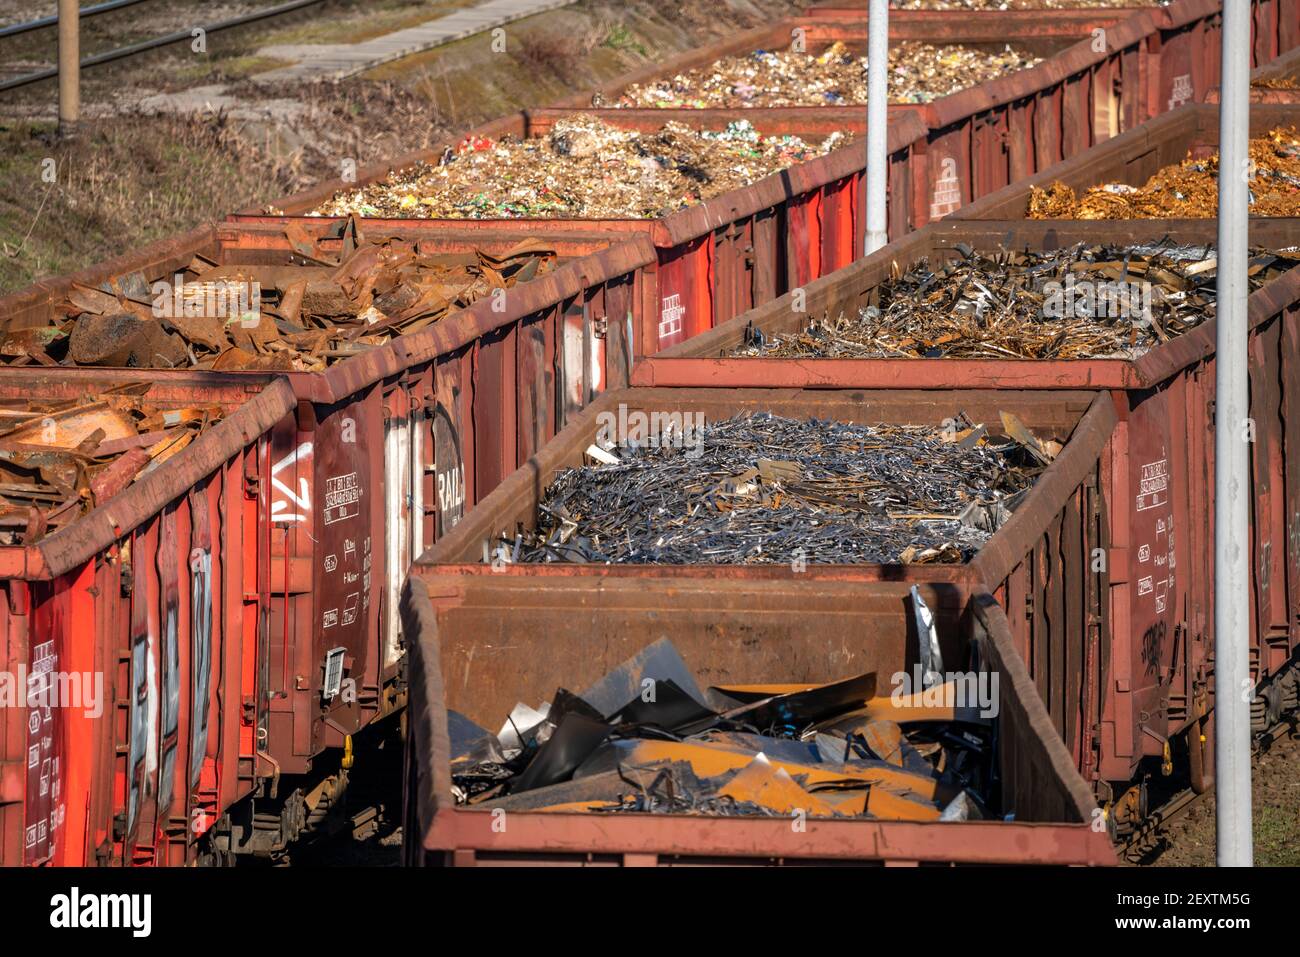 Metal scrap delivery, by rail, to HKM, Hüttenwerke Krupp-Mannesmann in Duisburg-Hüttenheim, they are remelted and processed into steel products, Duisb Stock Photo